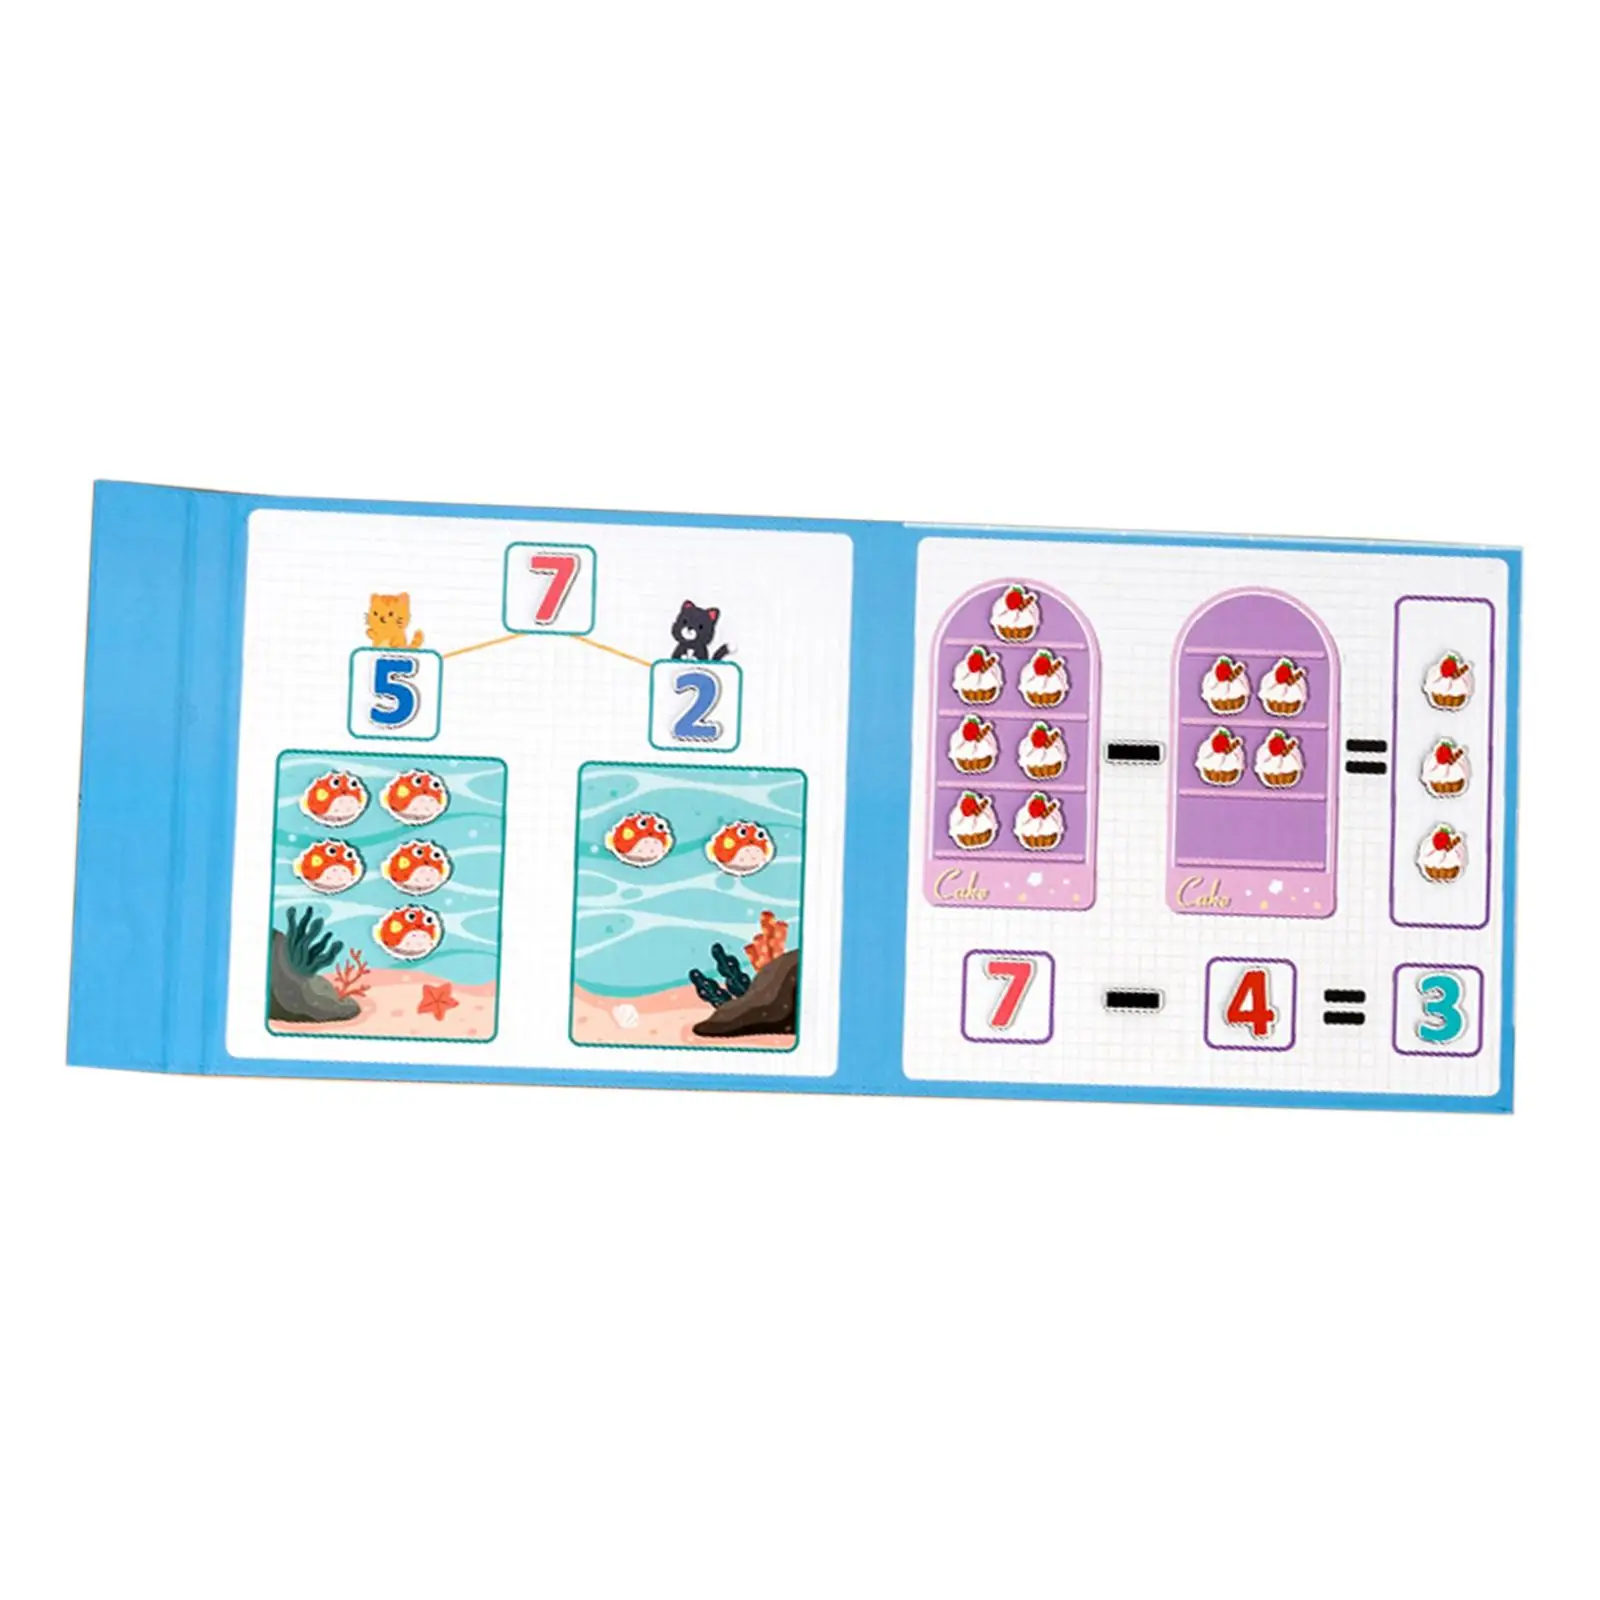 Kids Math Arithmetic Toy Math Toys Counting Toy for Elementary Preschool Boy